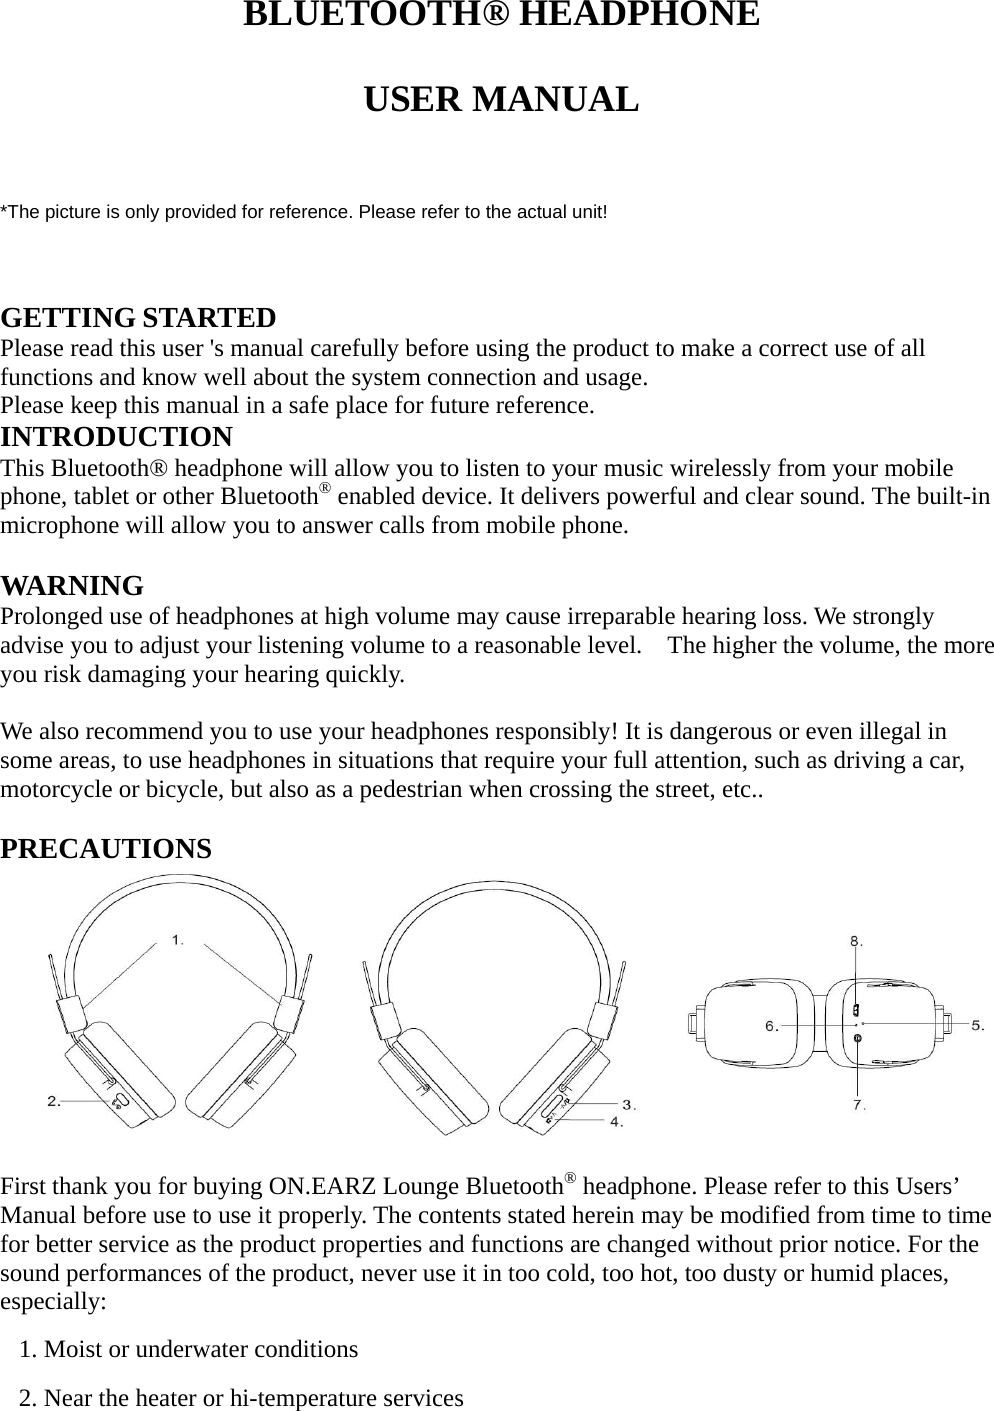   BLUETOOTH® HEADPHONE  USER MANUAL   *The picture is only provided for reference. Please refer to the actual unit!   GETTING STARTED Please read this user &apos;s manual carefully before using the product to make a correct use of all functions and know well about the system connection and usage.   Please keep this manual in a safe place for future reference.   INTRODUCTION This Bluetooth® headphone will allow you to listen to your music wirelessly from your mobile phone, tablet or other Bluetooth® enabled device. It delivers powerful and clear sound. The built-in microphone will allow you to answer calls from mobile phone.  WARNING Prolonged use of headphones at high volume may cause irreparable hearing loss. We strongly advise you to adjust your listening volume to a reasonable level.    The higher the volume, the more you risk damaging your hearing quickly.  We also recommend you to use your headphones responsibly! It is dangerous or even illegal in some areas, to use headphones in situations that require your full attention, such as driving a car, motorcycle or bicycle, but also as a pedestrian when crossing the street, etc..  PRECAUTIONS          First thank you for buying ON.EARZ Lounge Bluetooth® headphone. Please refer to this Users’ Manual before use to use it properly. The contents stated herein may be modified from time to time for better service as the product properties and functions are changed without prior notice. For the sound performances of the product, never use it in too cold, too hot, too dusty or humid places, especially: 1. Moist or underwater conditions 2. Near the heater or hi-temperature services   